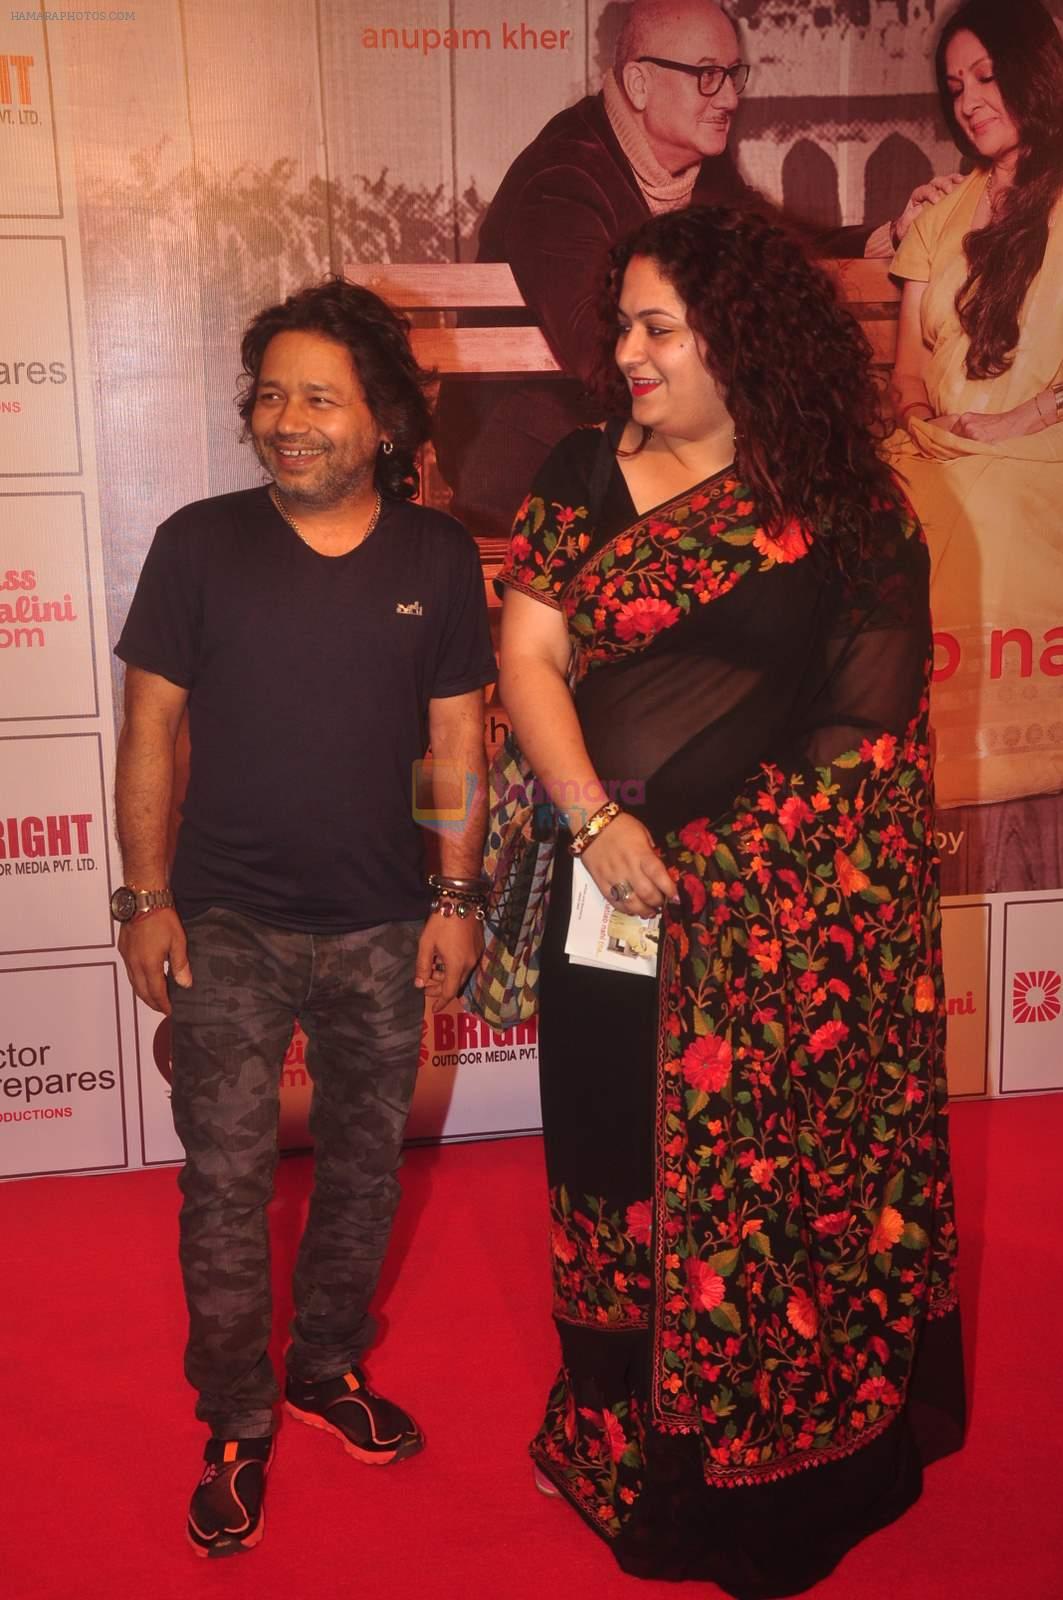 Kailash Kher at Anupam and Neena Gupta's play premiere in NCPA on 8th March 2015